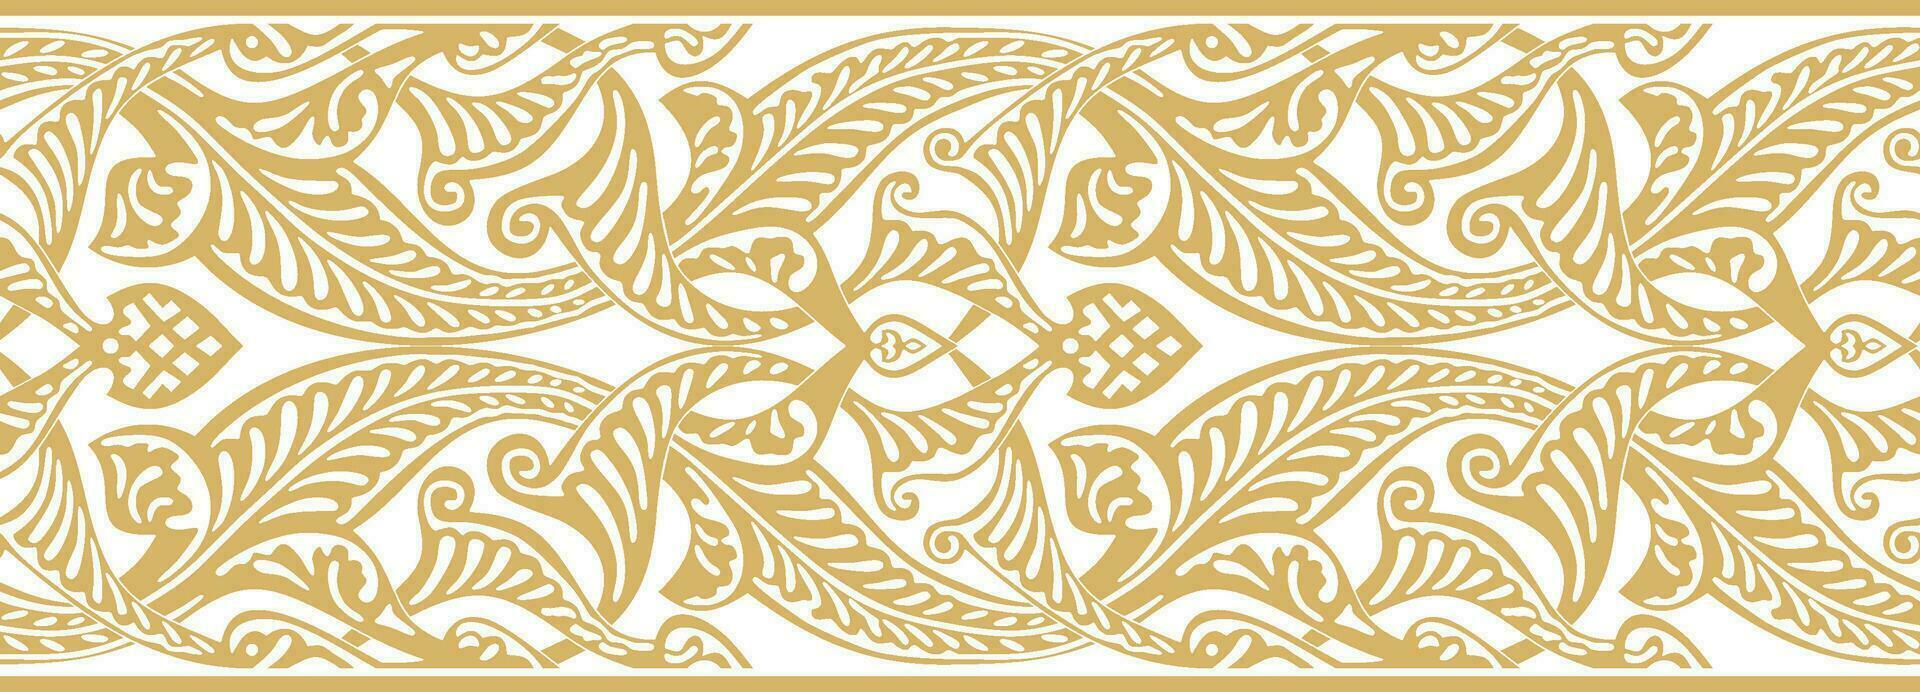 Vector golden seamless oriental national ornament. Endless ethnic floral border, arab peoples frame. Persian painting.